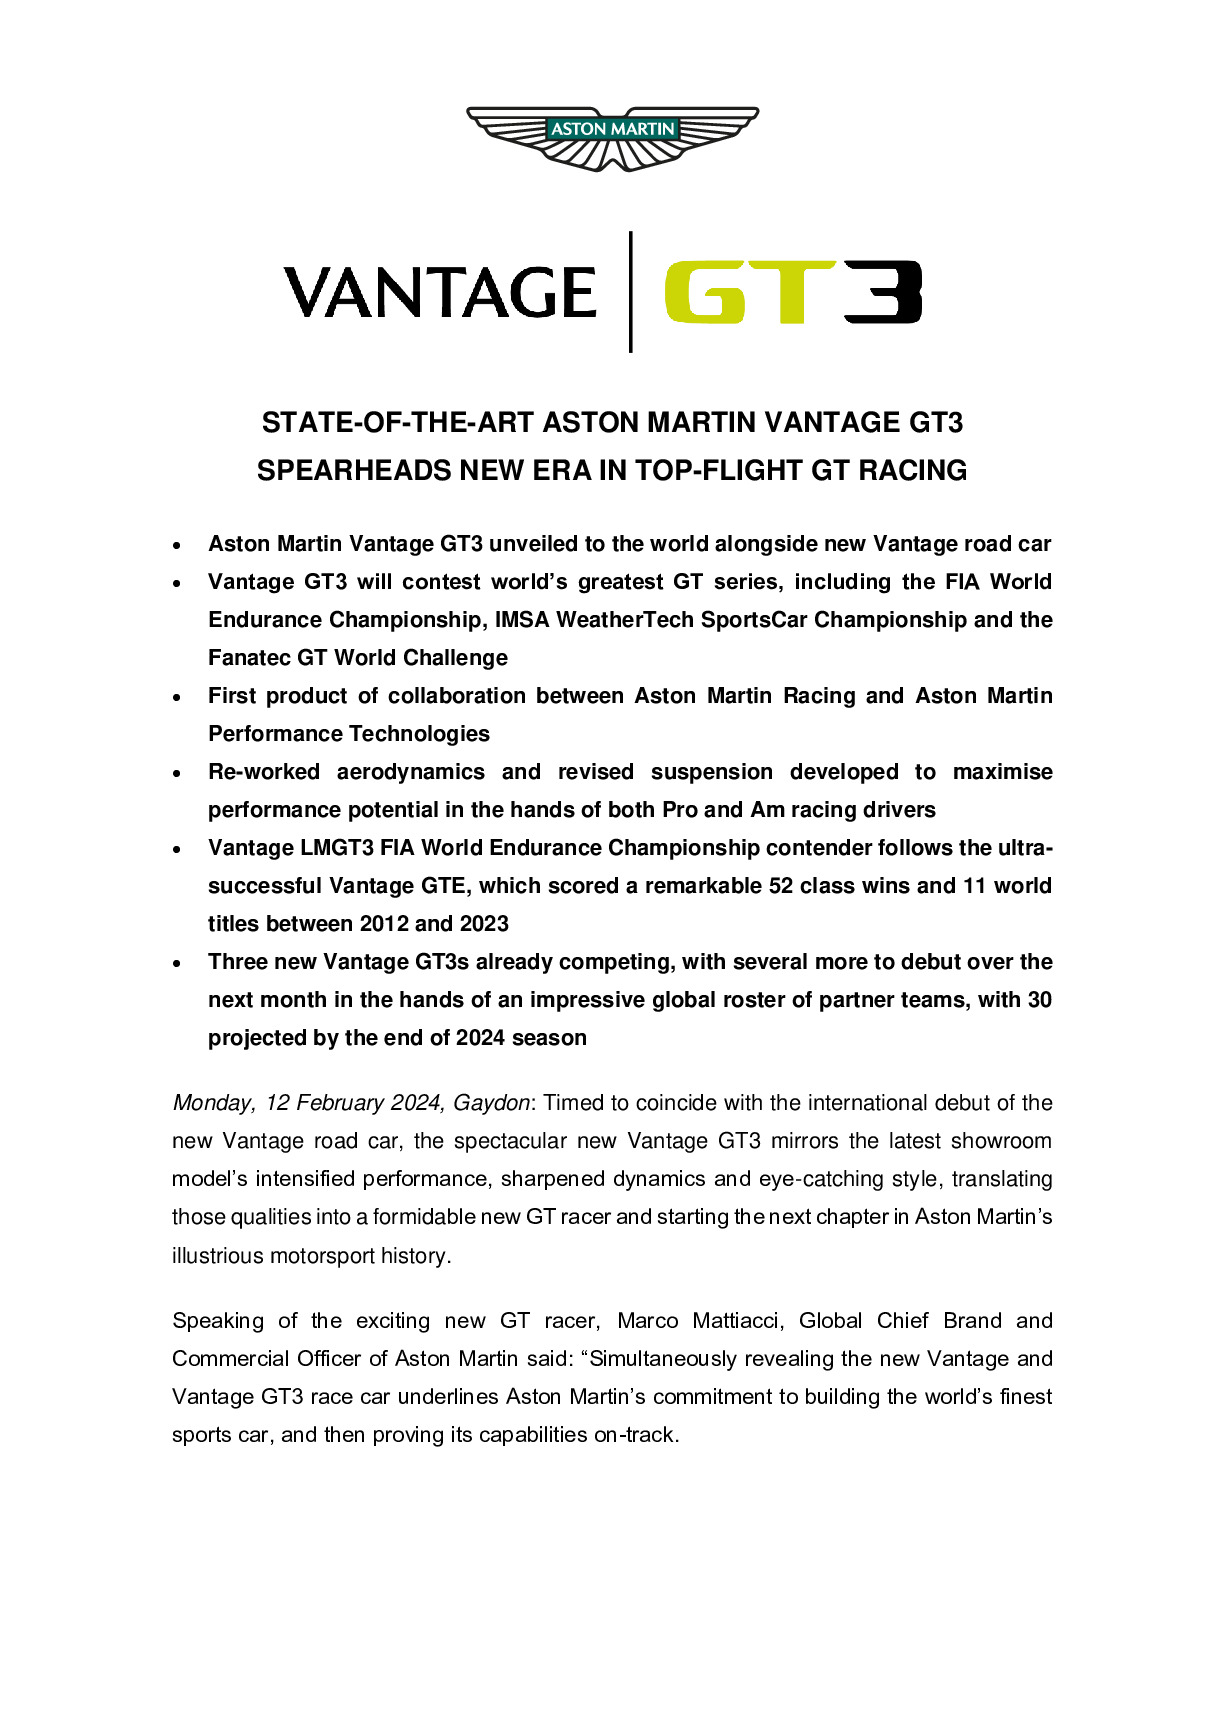 State-of-the-art Aston Martin Vantage GT3 spearheads new era in top-flight GT racing-pdf